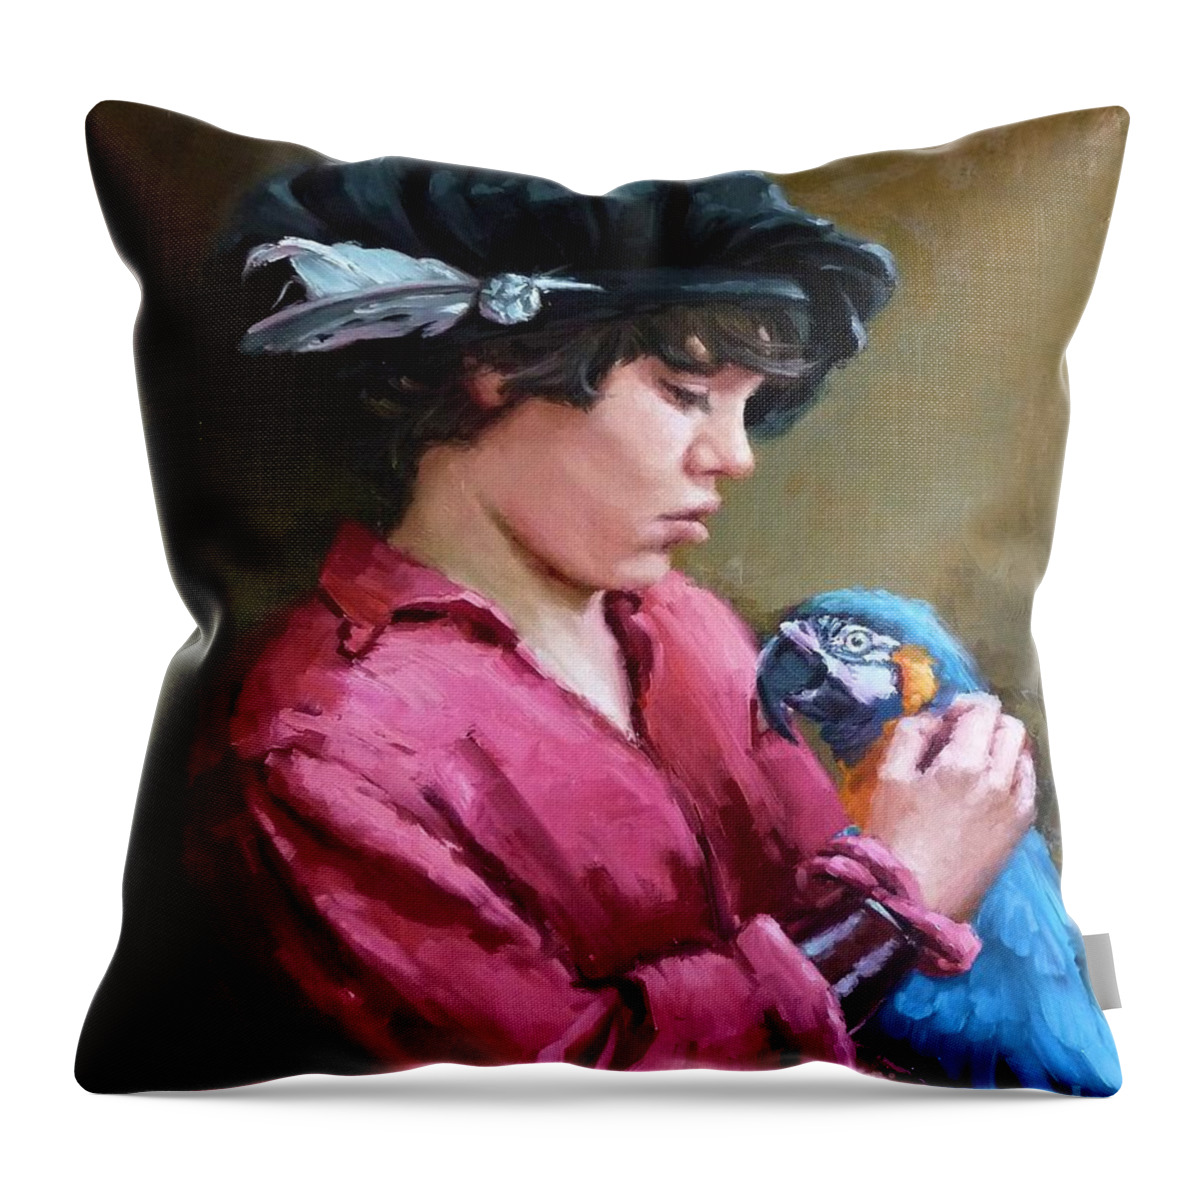 Boy Throw Pillow featuring the painting Friendship by Viktoria K Majestic